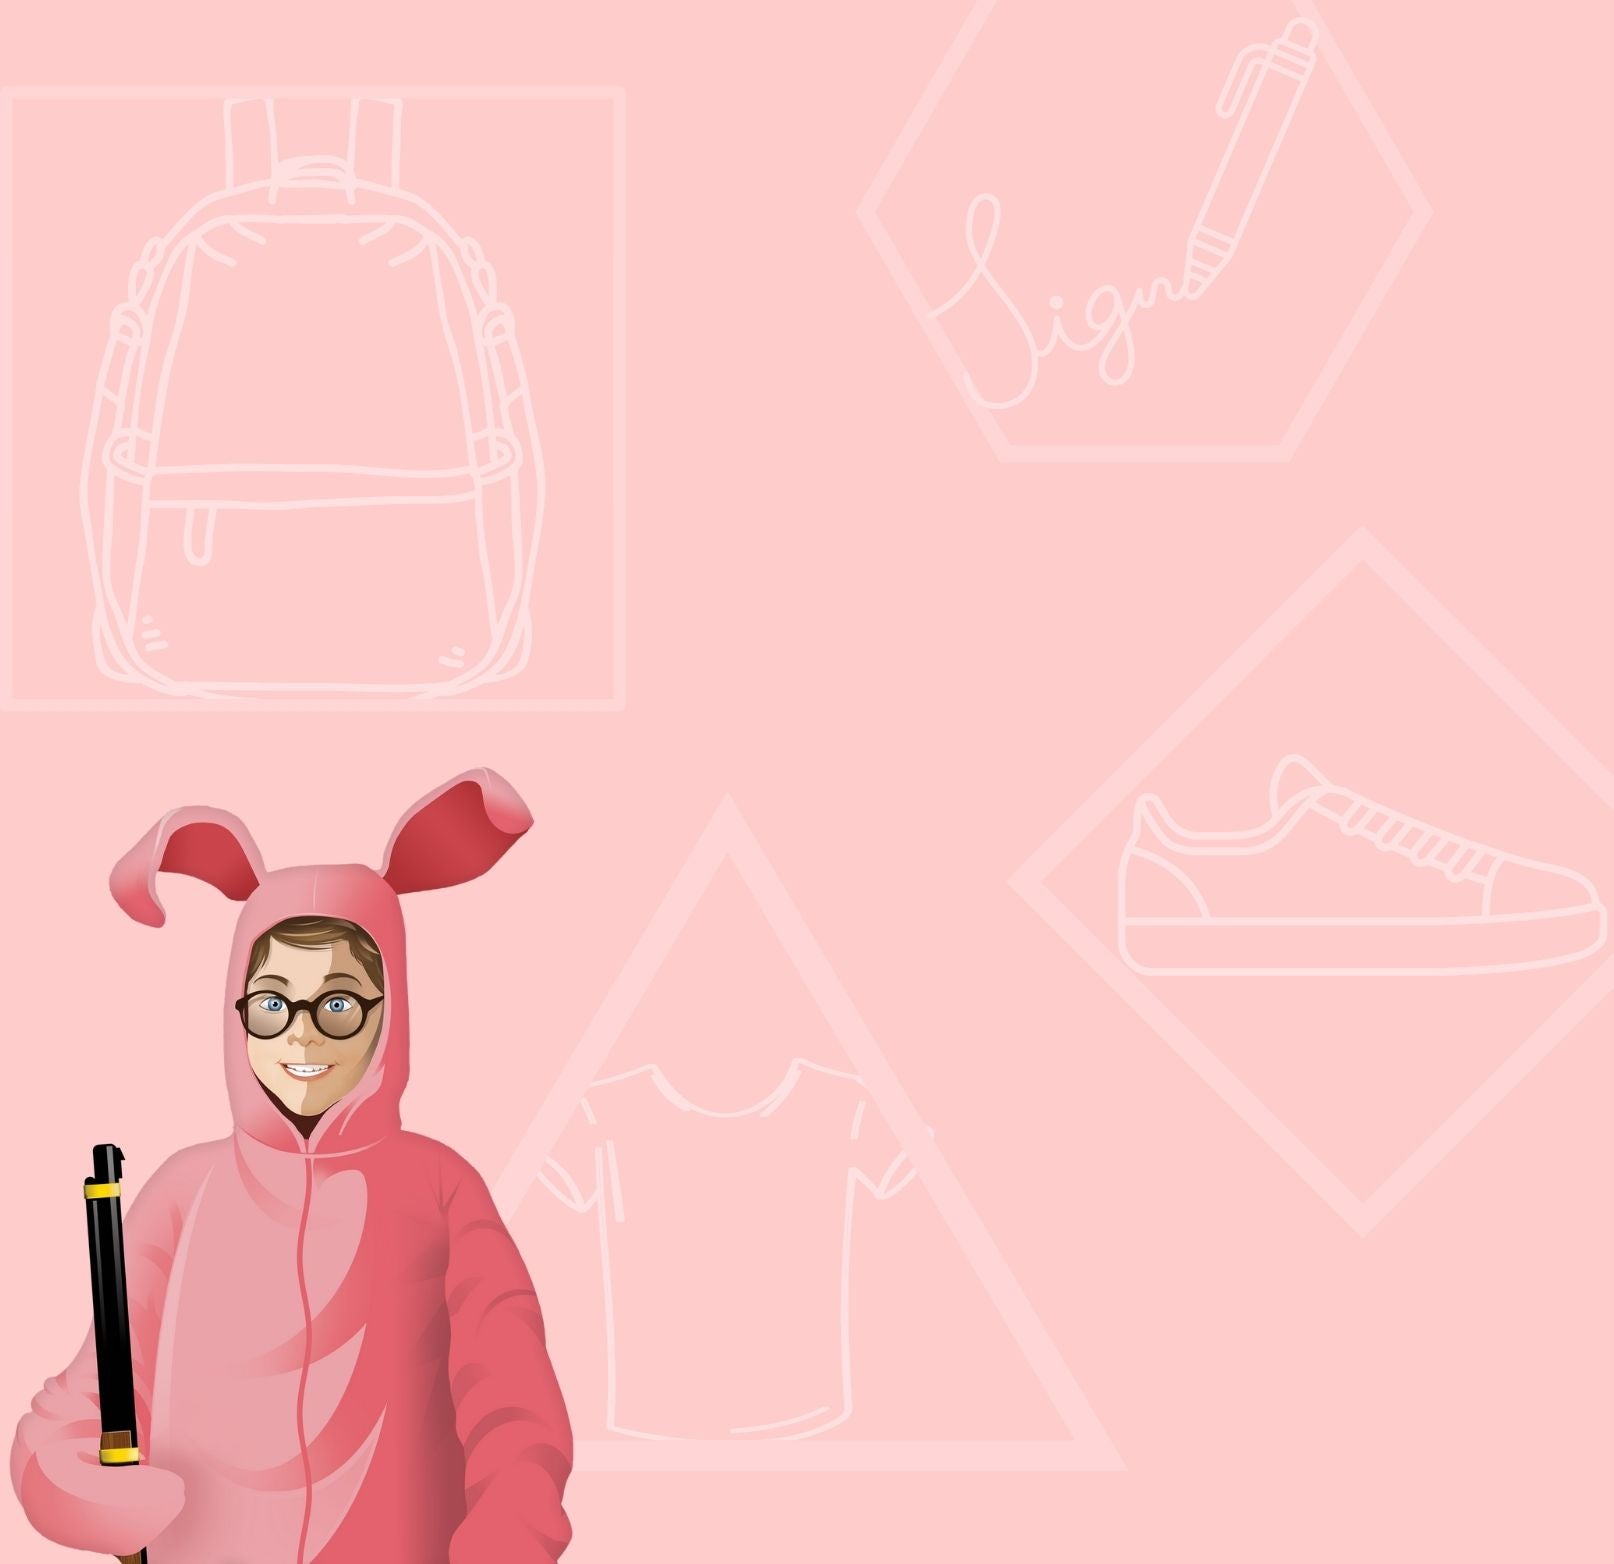 Ralphie from A Christmas Story in a bunny suit (the pink nightmare)